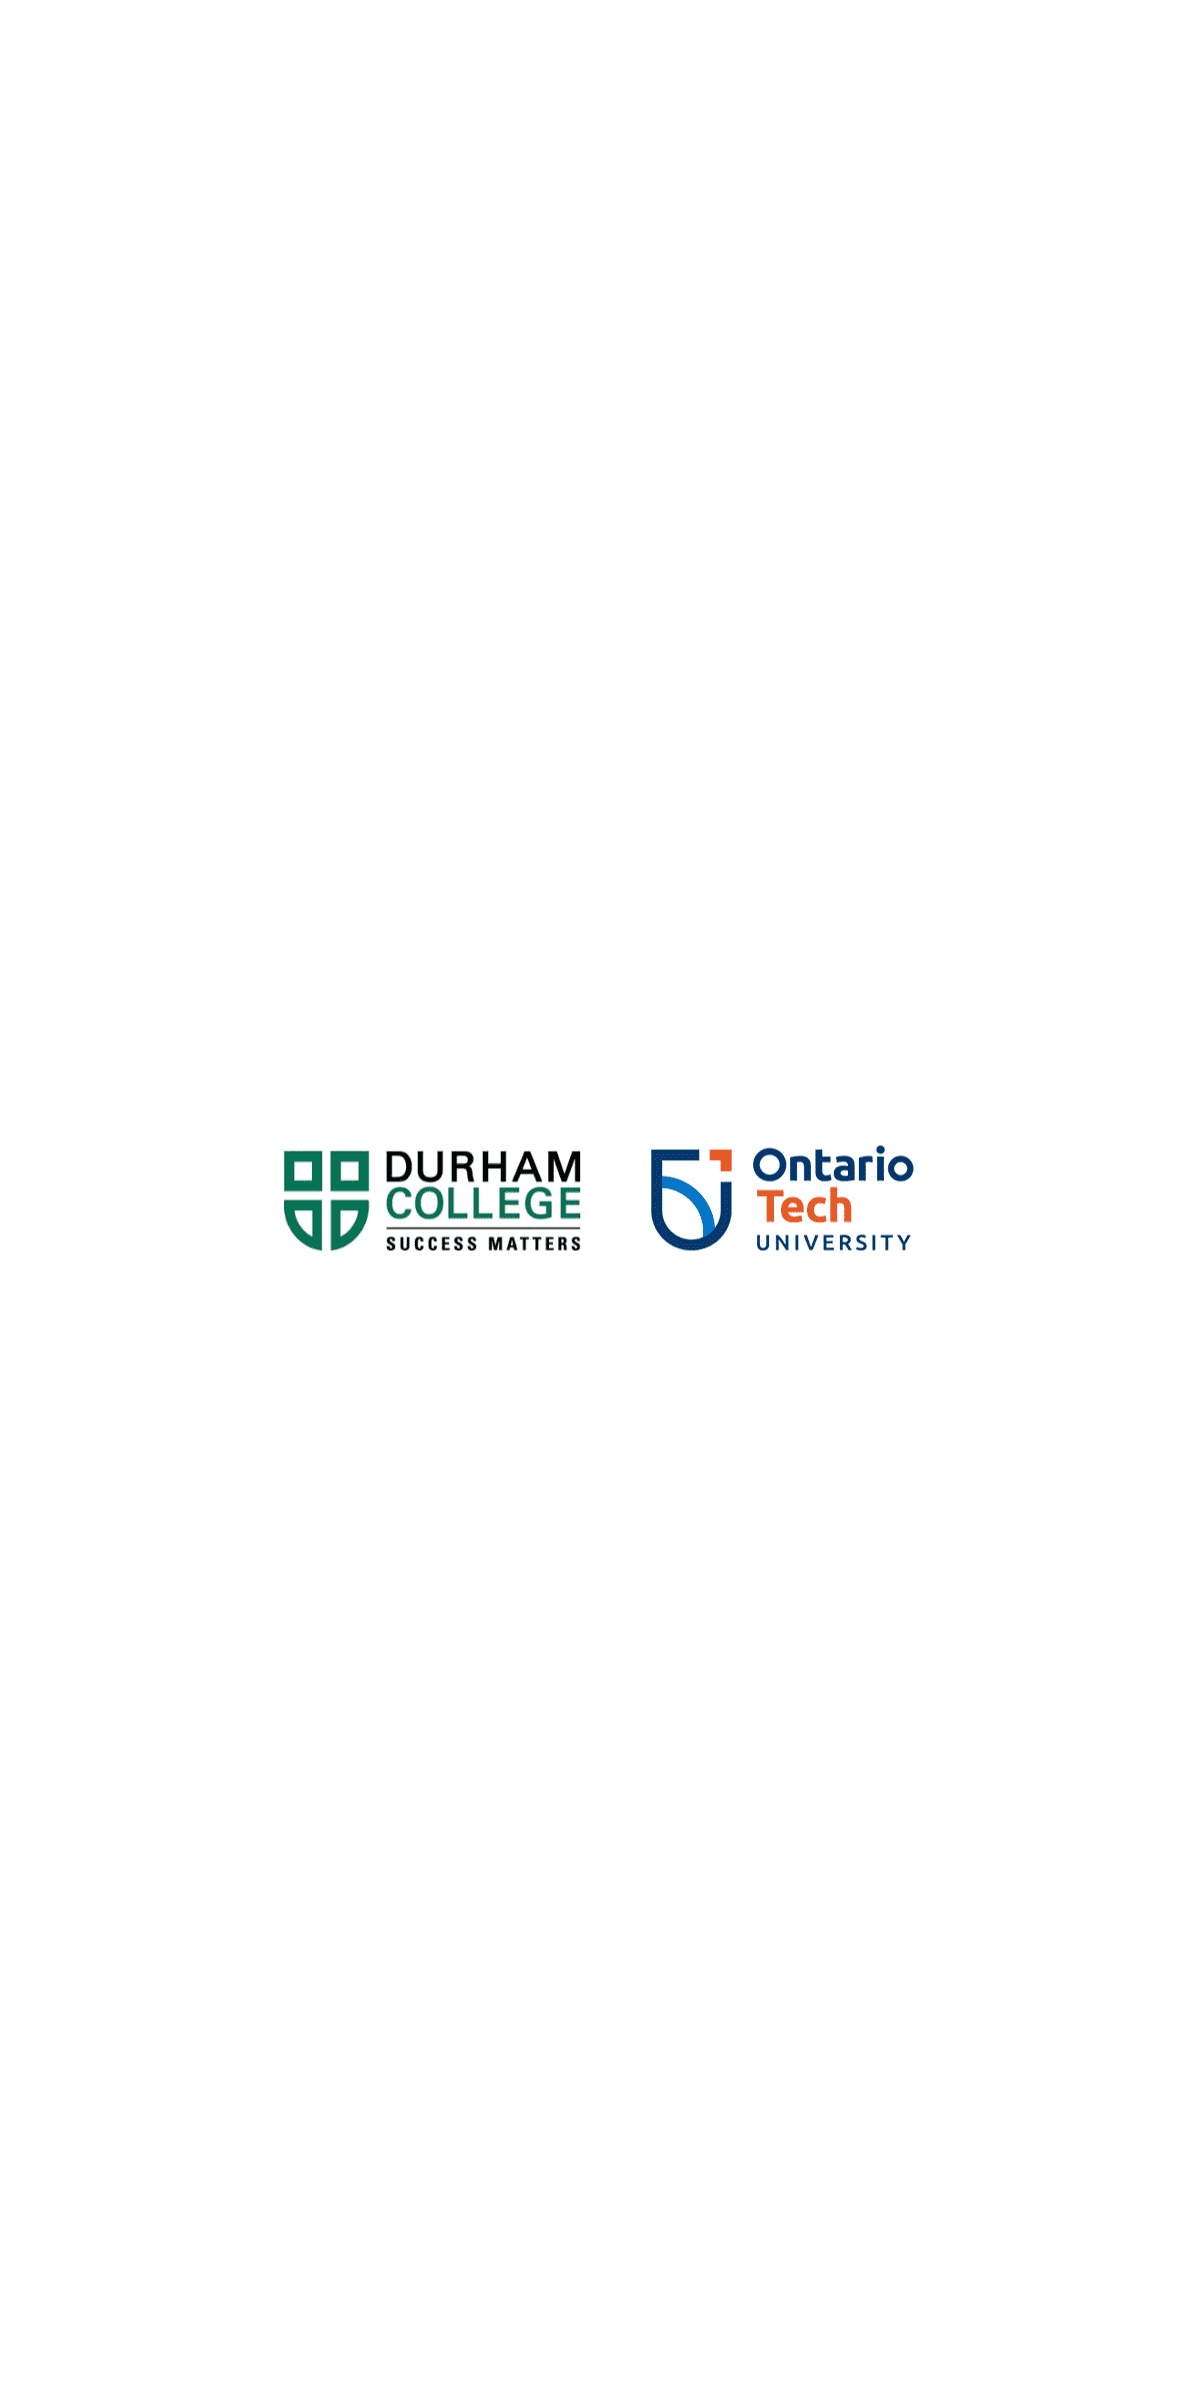 A complete backup of dc-uoit.ca